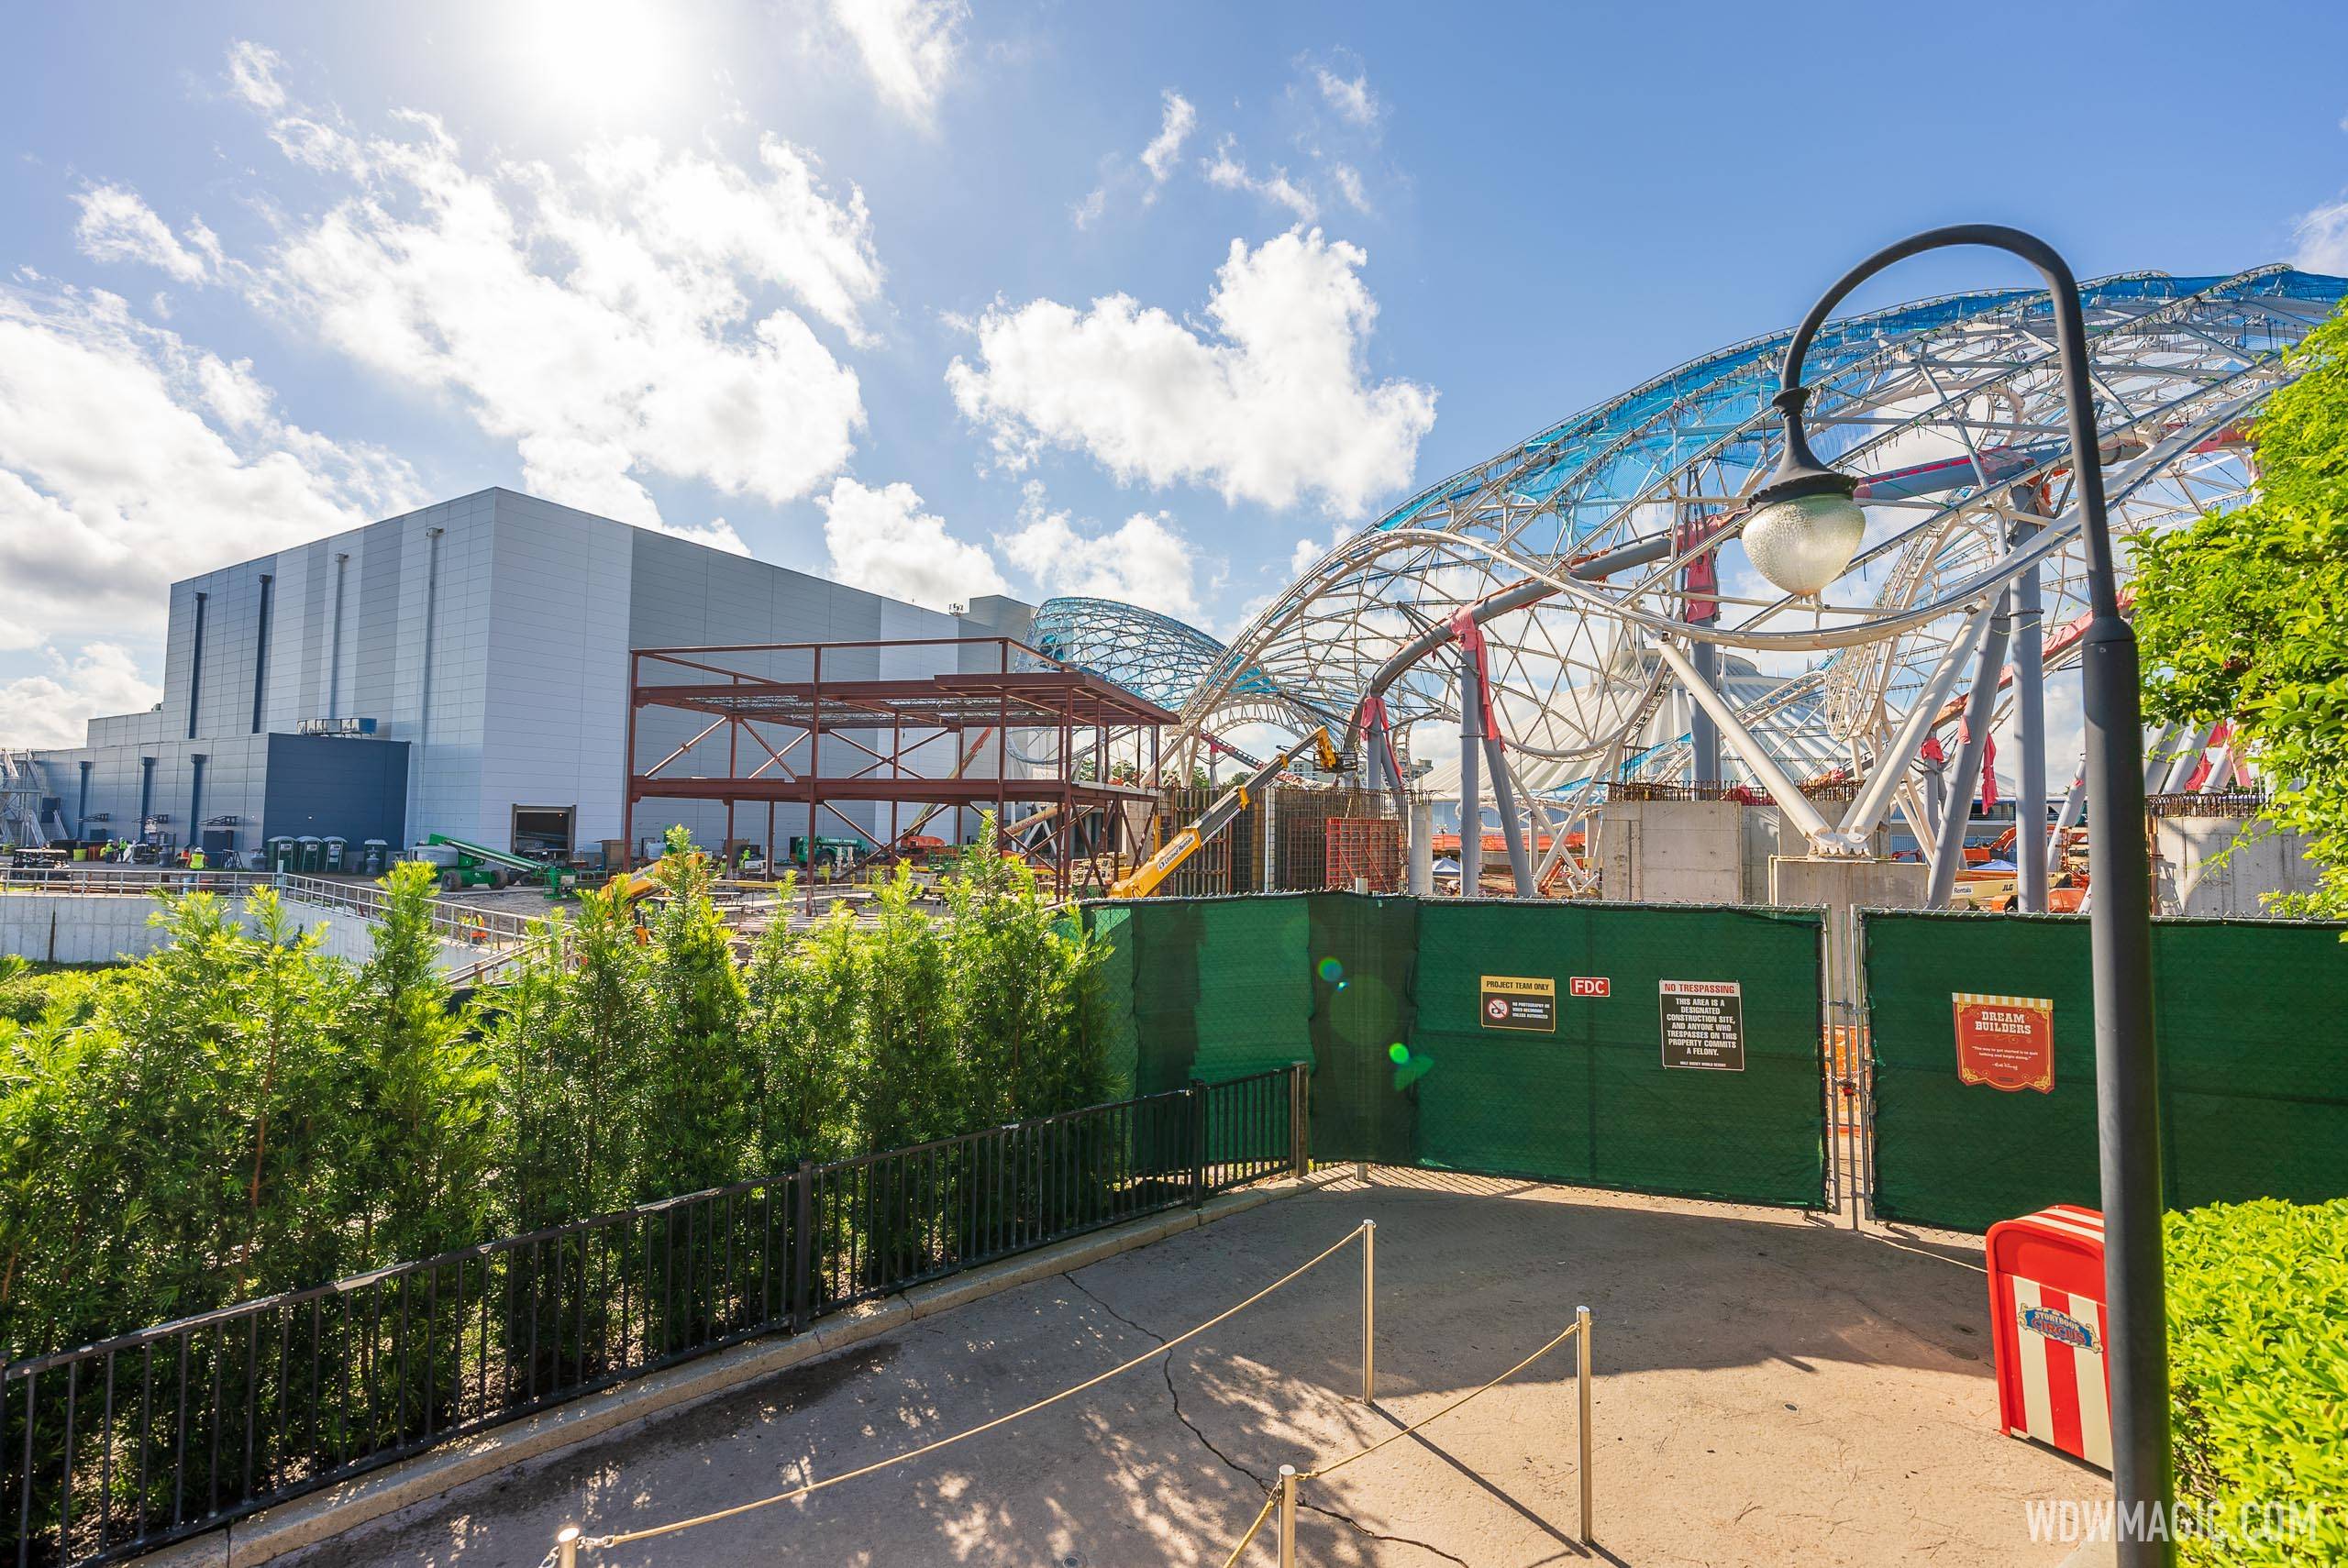 More structures are being added to the TRON Lightcyle Run site at the Magic Kingdom